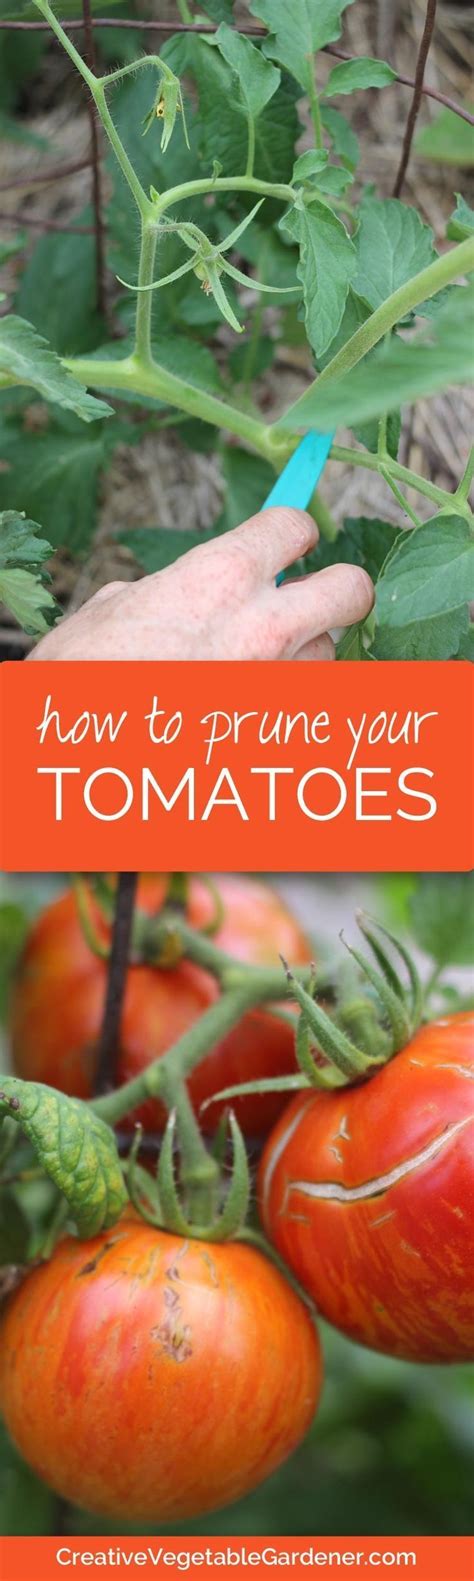 Prune Tomatoes Should Be On Your Garden To Do List This Year If You